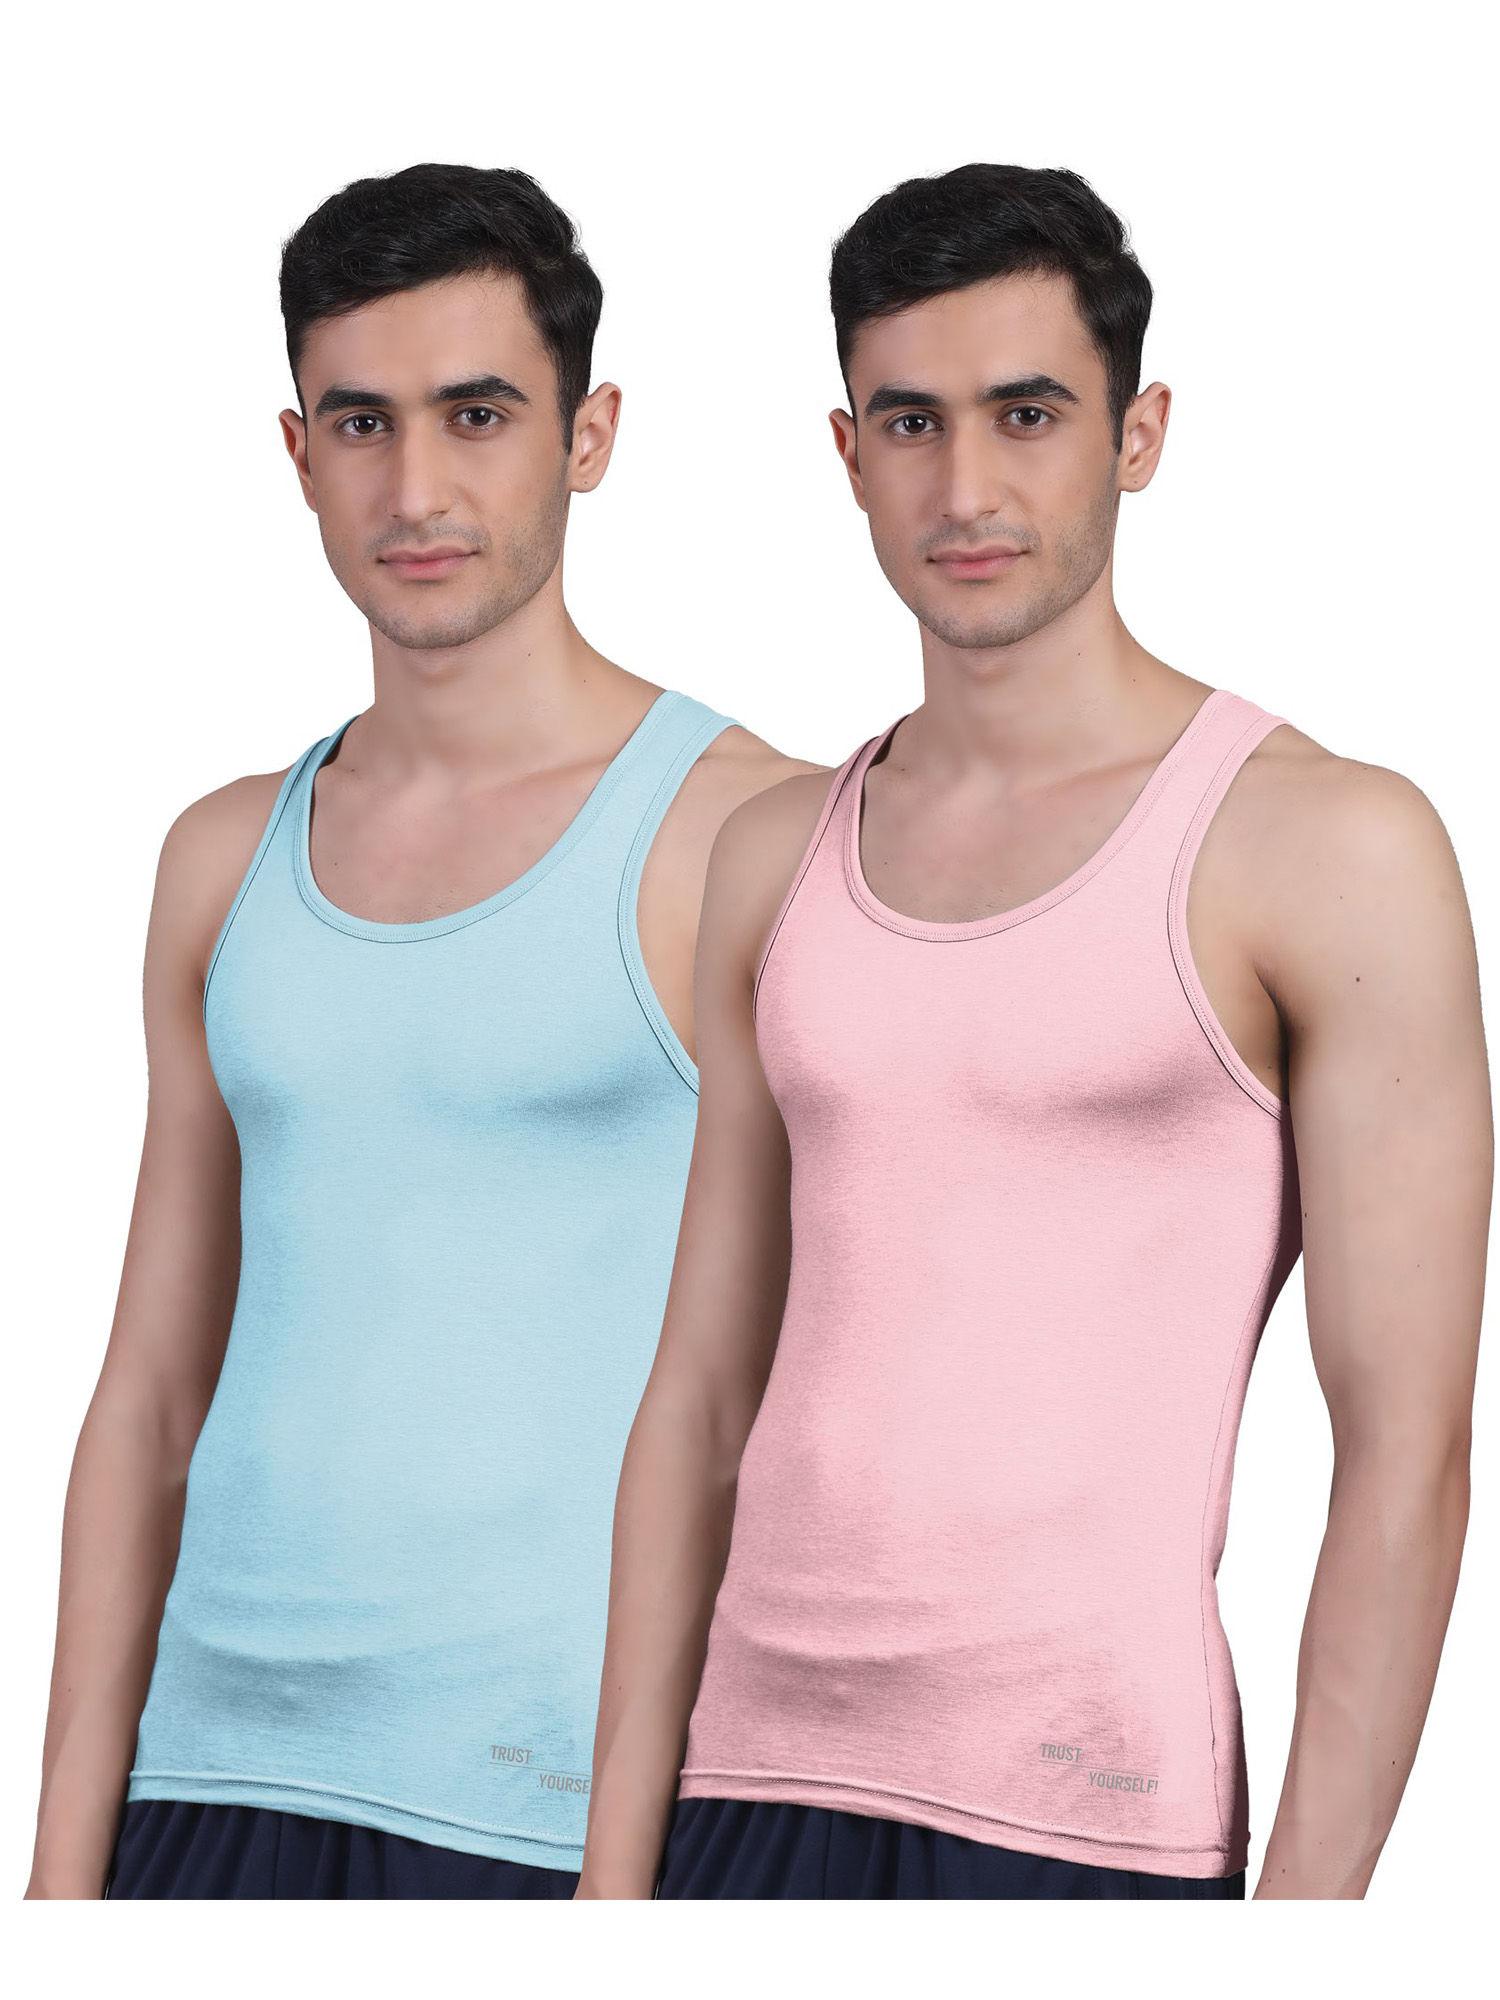 men's twin skin bamboo anti microbial breathtech cotton vest, pack of 2 multi-color